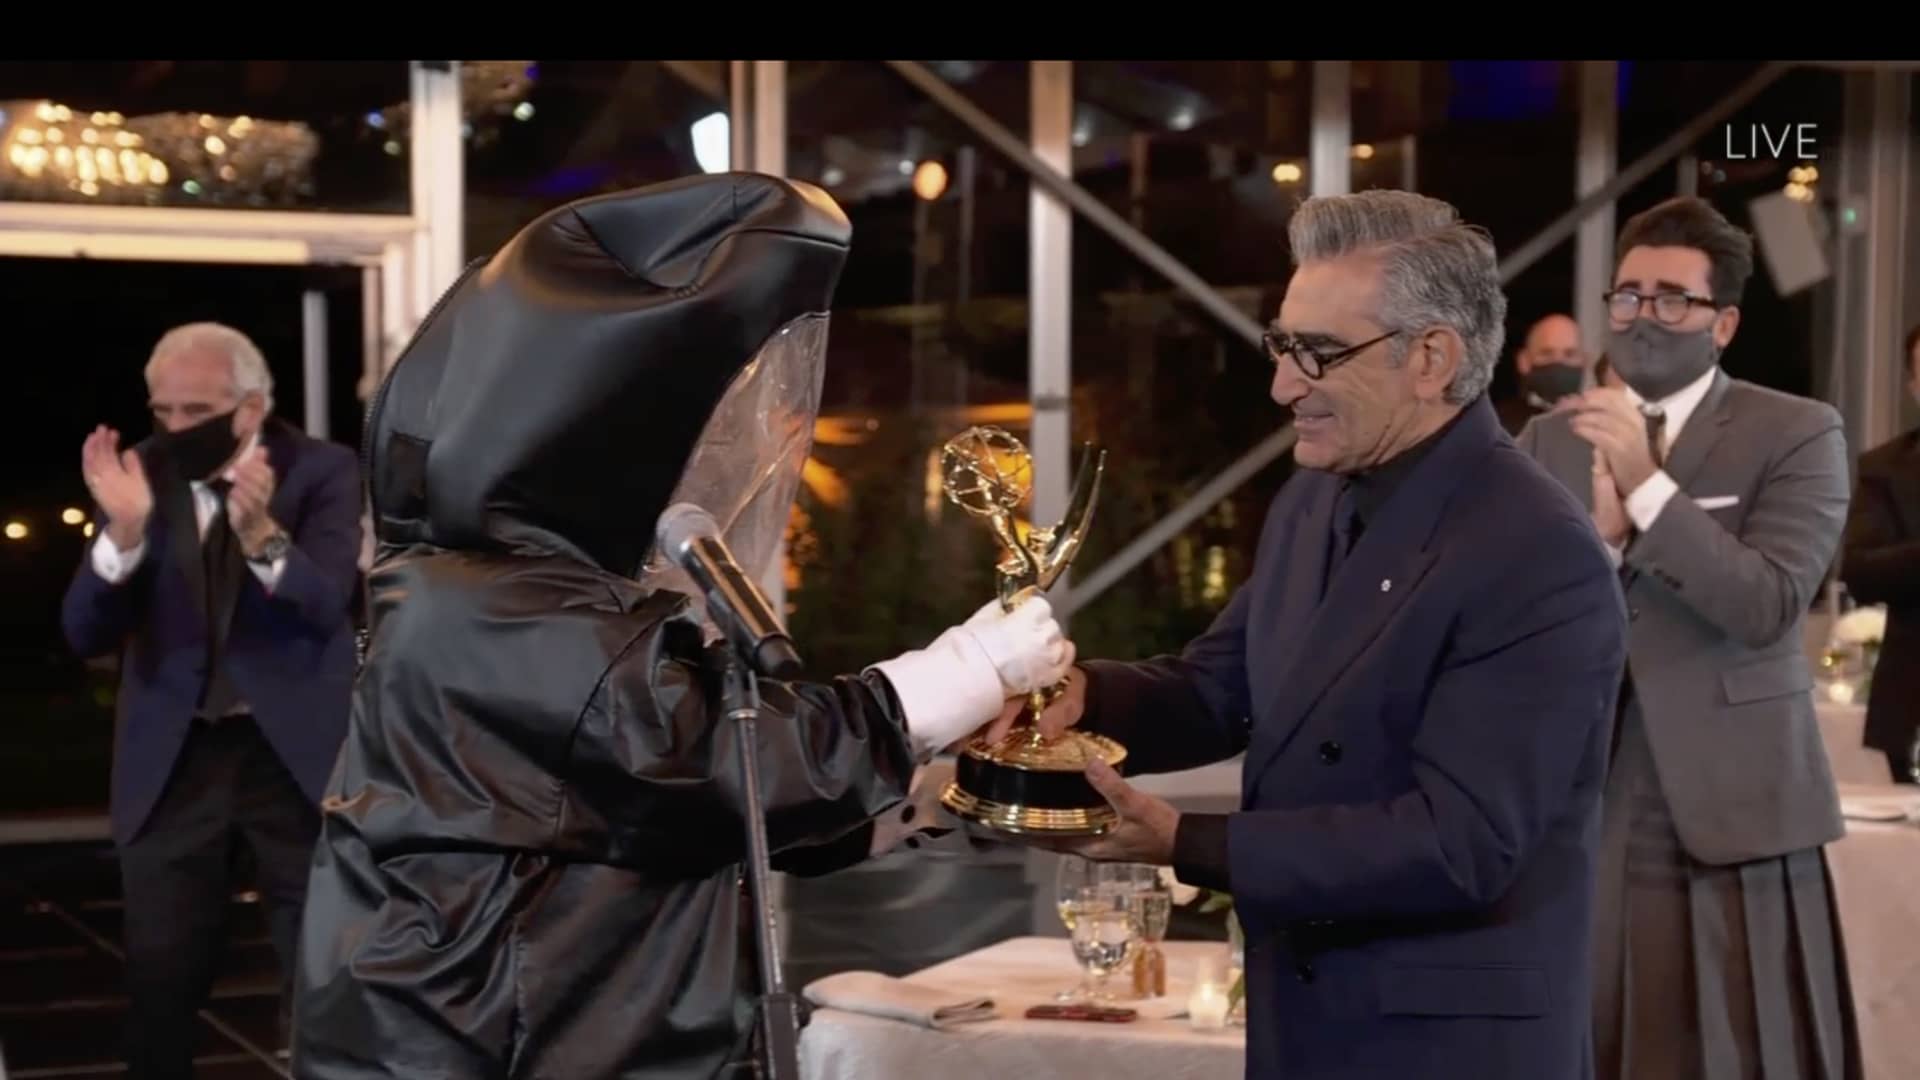 Eugene Levy receives his Emmy Award for lead actor in a comedy series during the September 20, 2020 ceremony.